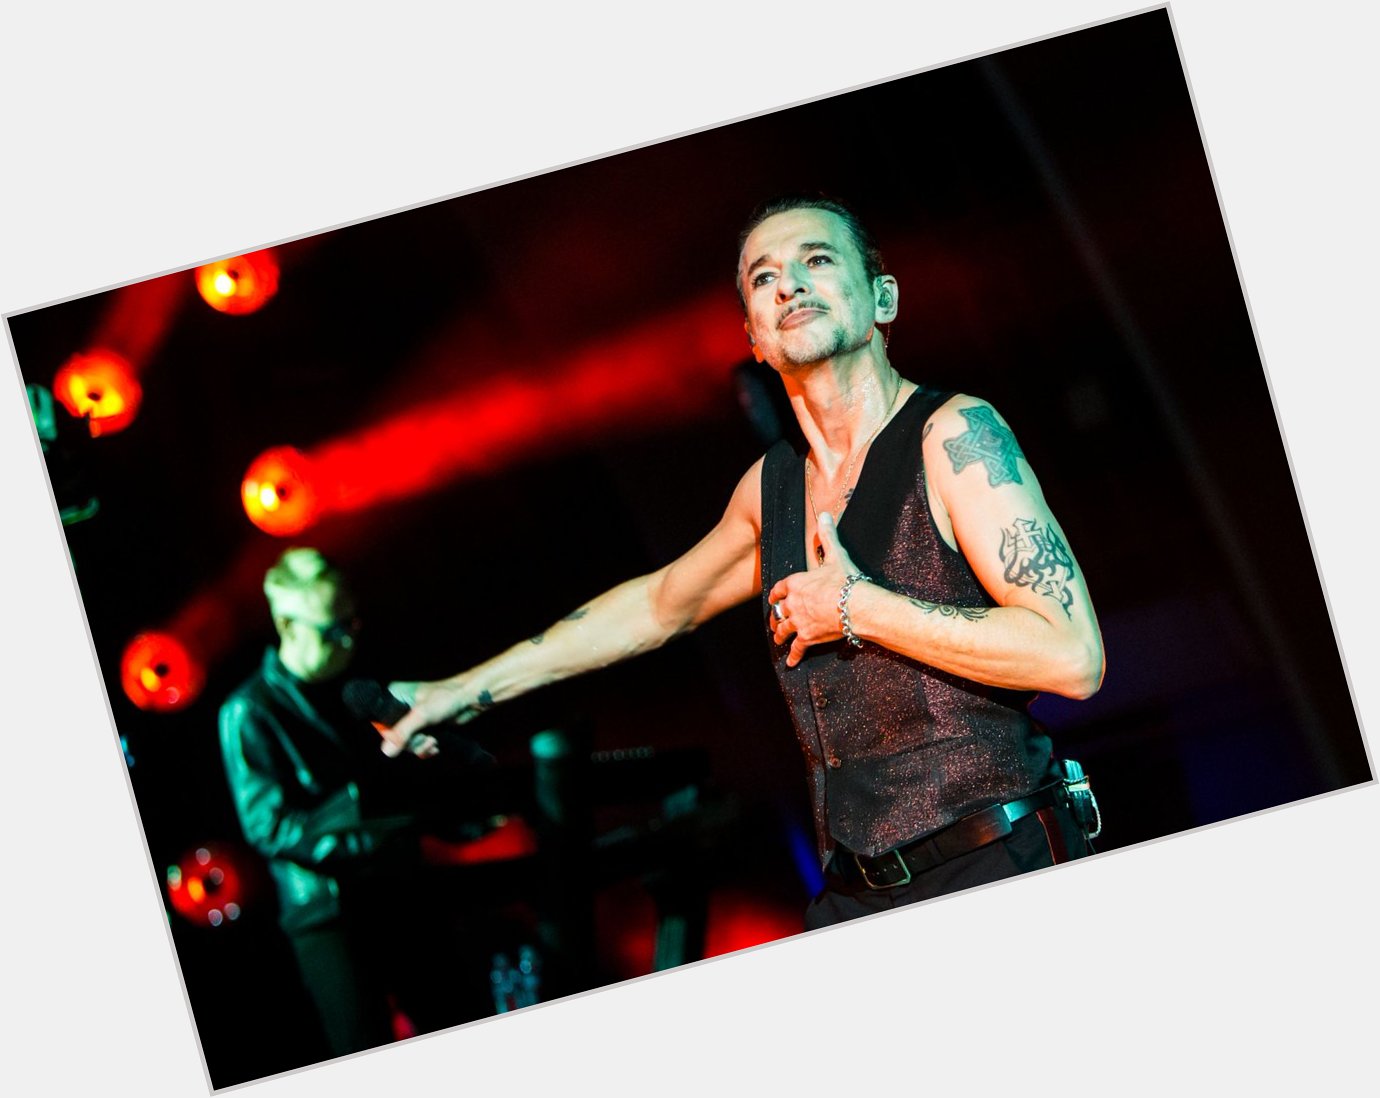 Happy birthday, Dave Gahan! The frontman turns 59 years old today. : 